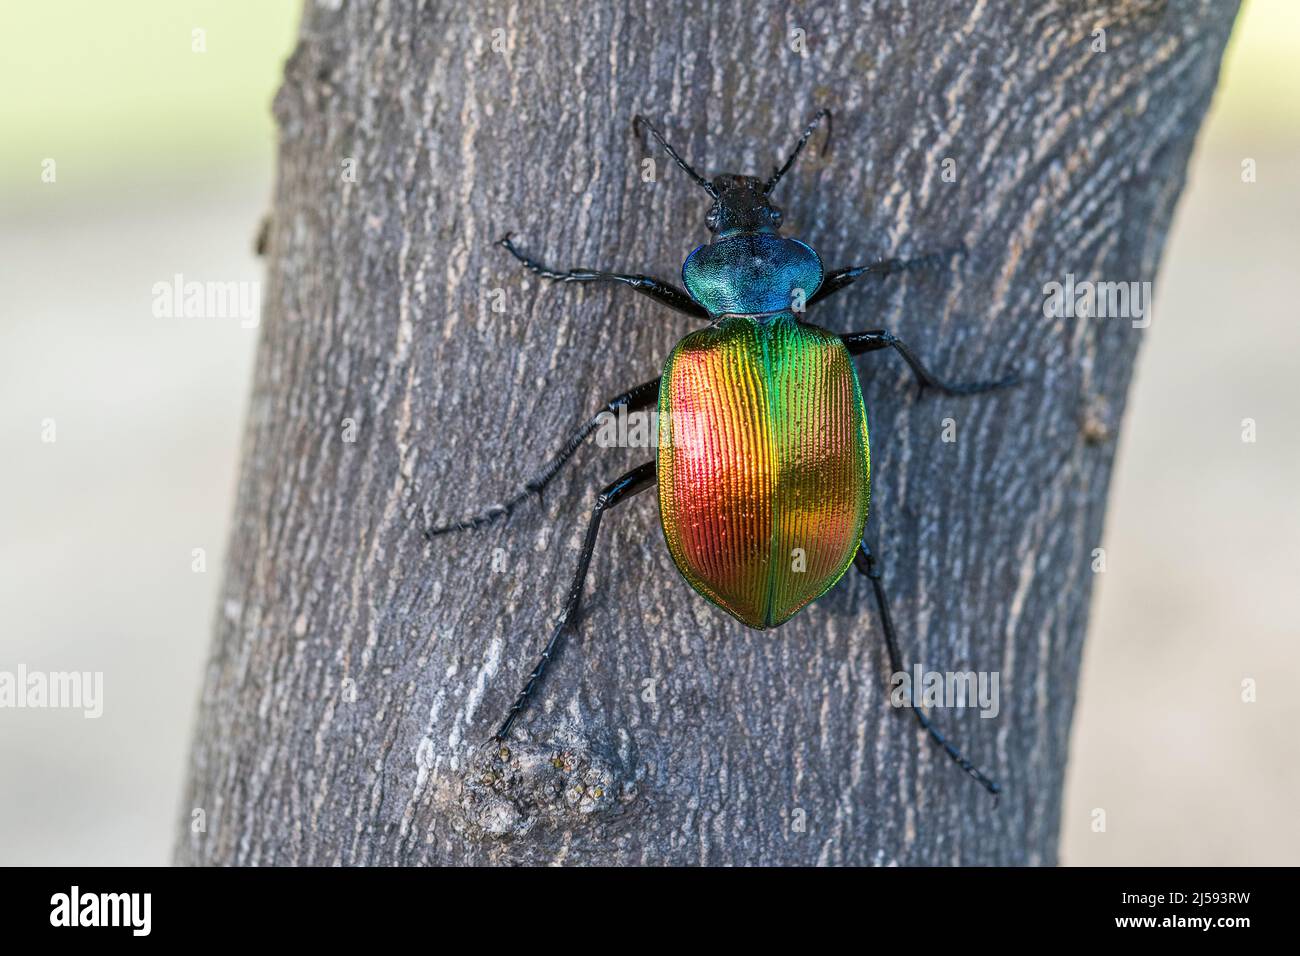 Agreeable Caterpillar Hunter or Forest Caterpillar Hunter(Calosoma sycophanta), is a species of ground beetle belonging to the family Carabidae. Stock Photo